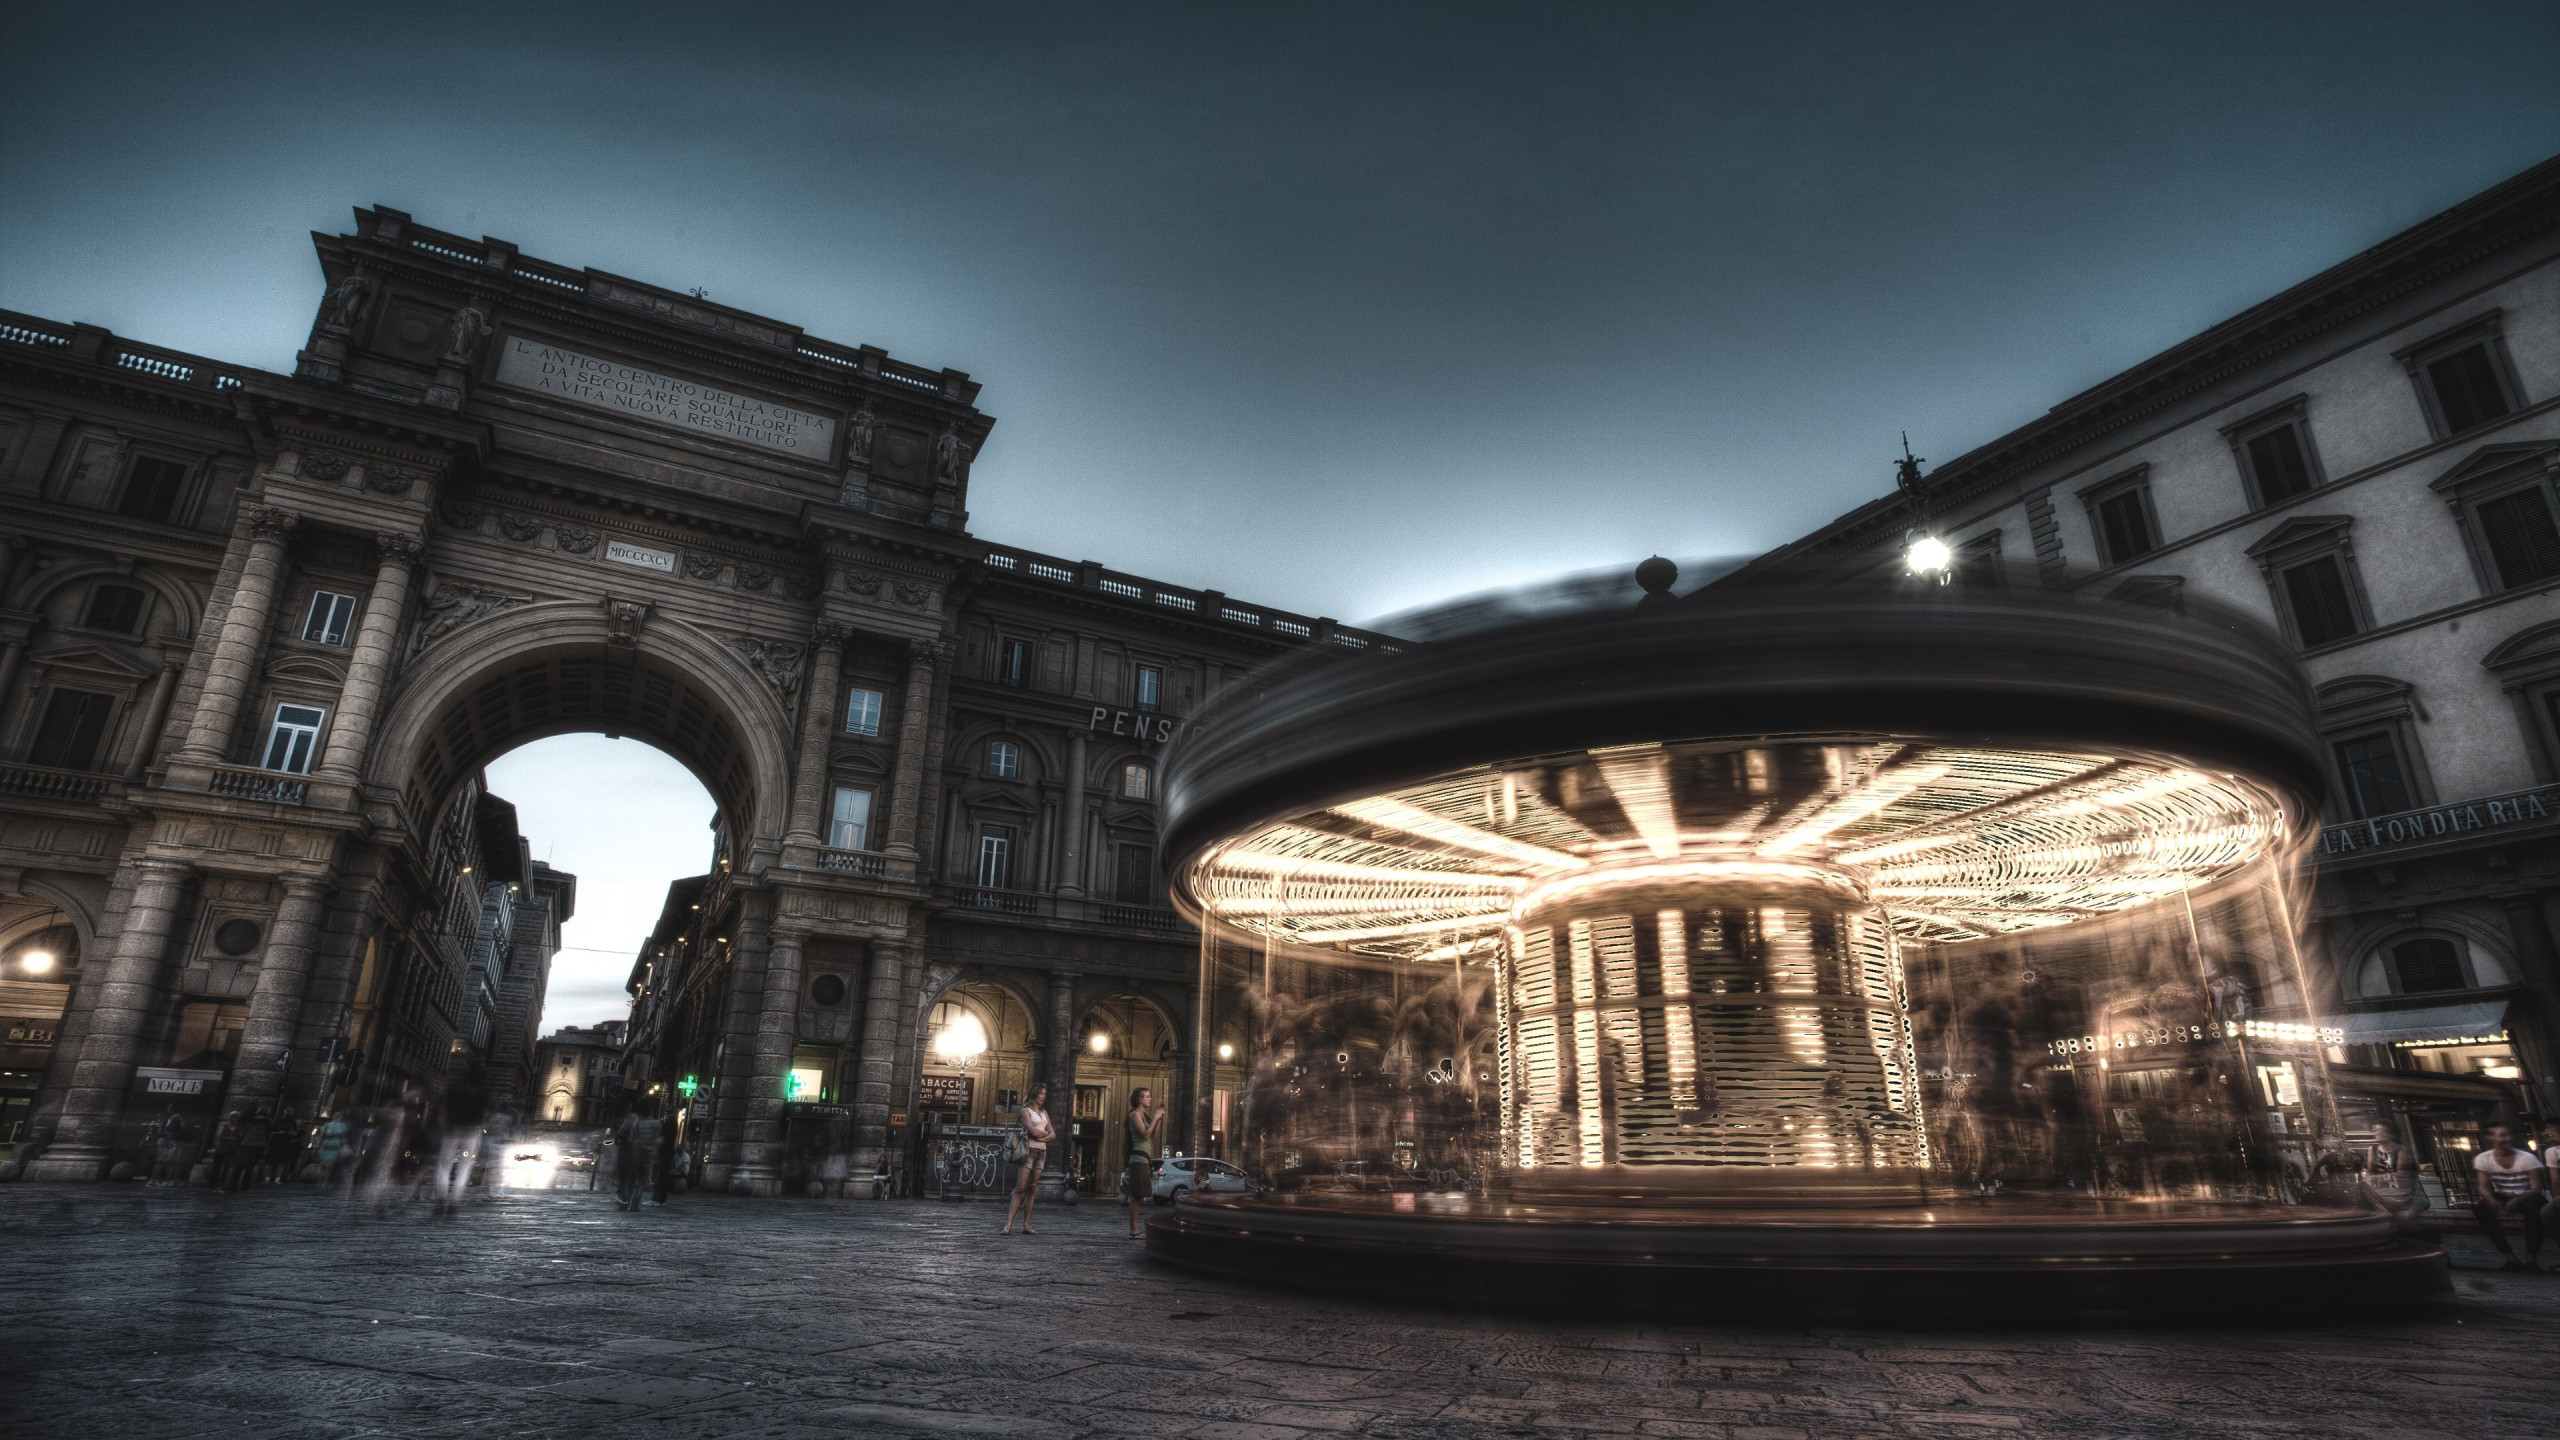 Carousel, people and buildings from Florence wallpaper 2560x1440